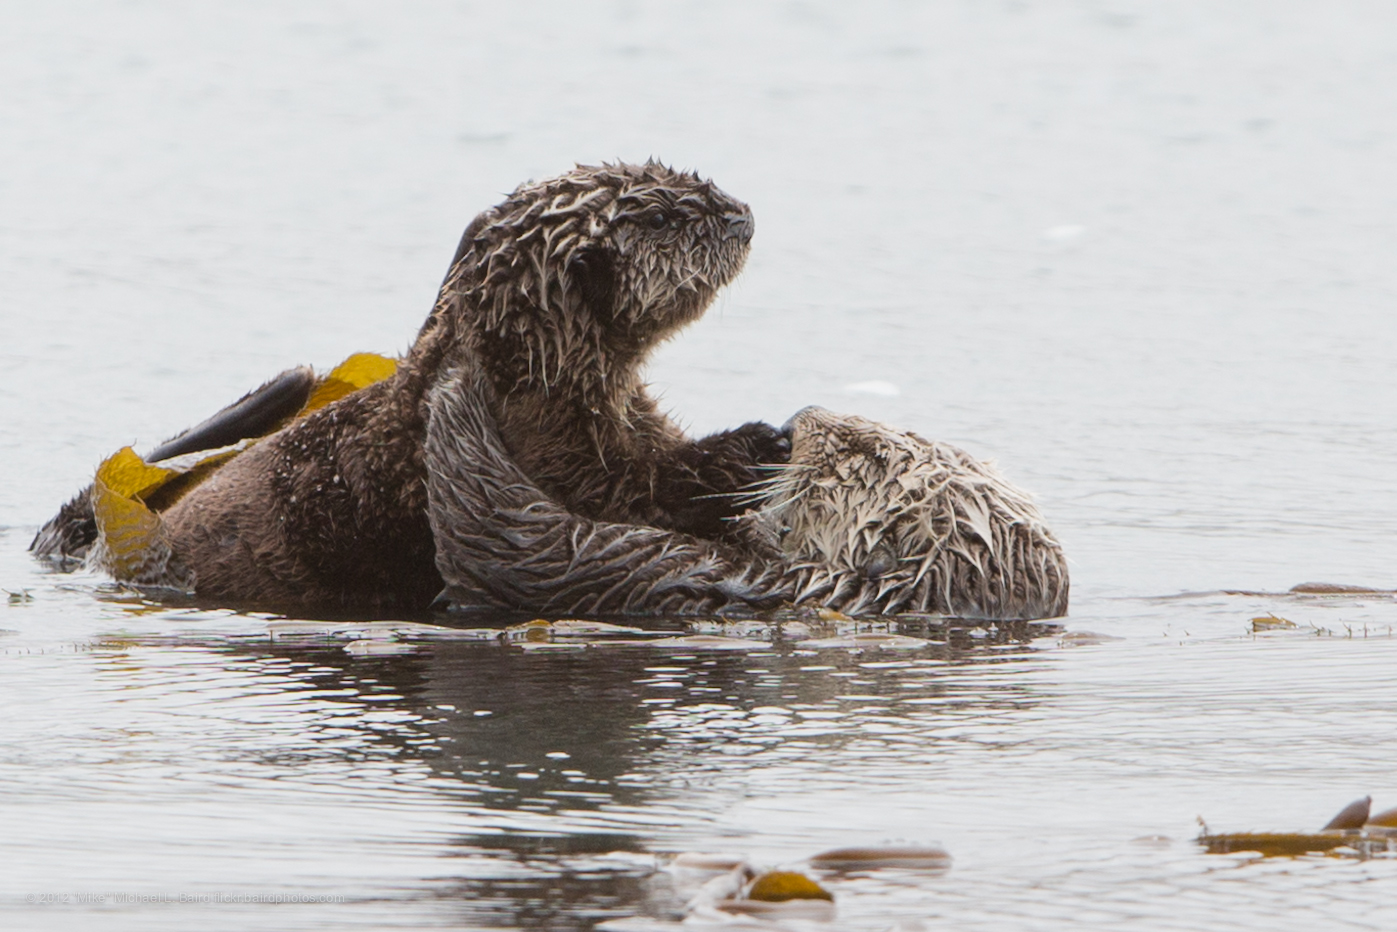 two beavers wrestling in the lake water